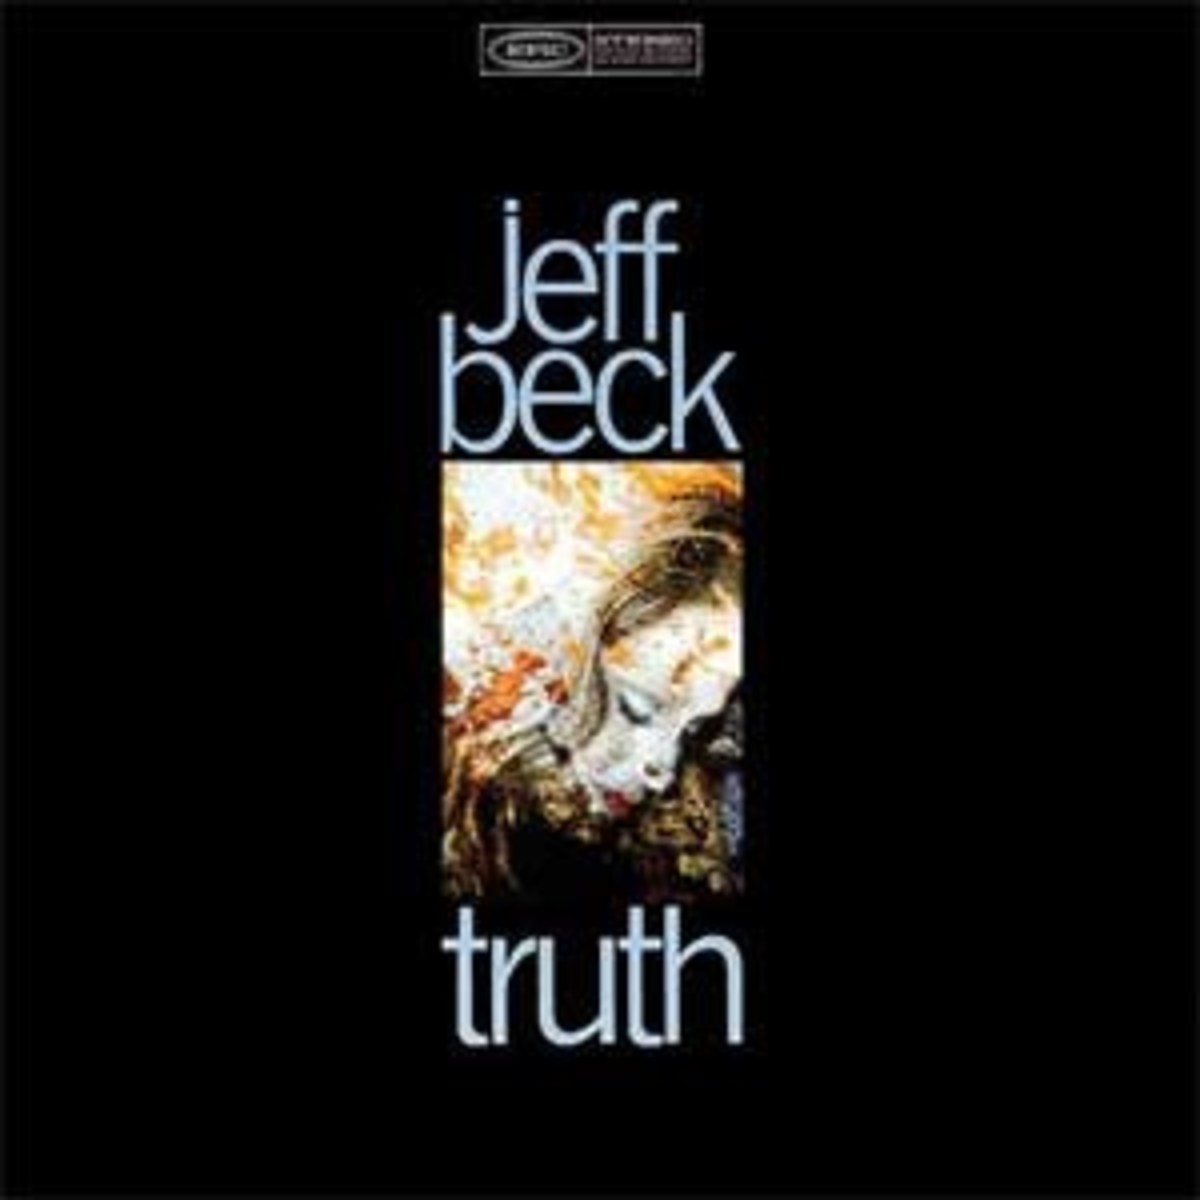 Jeff_Beck-Truth